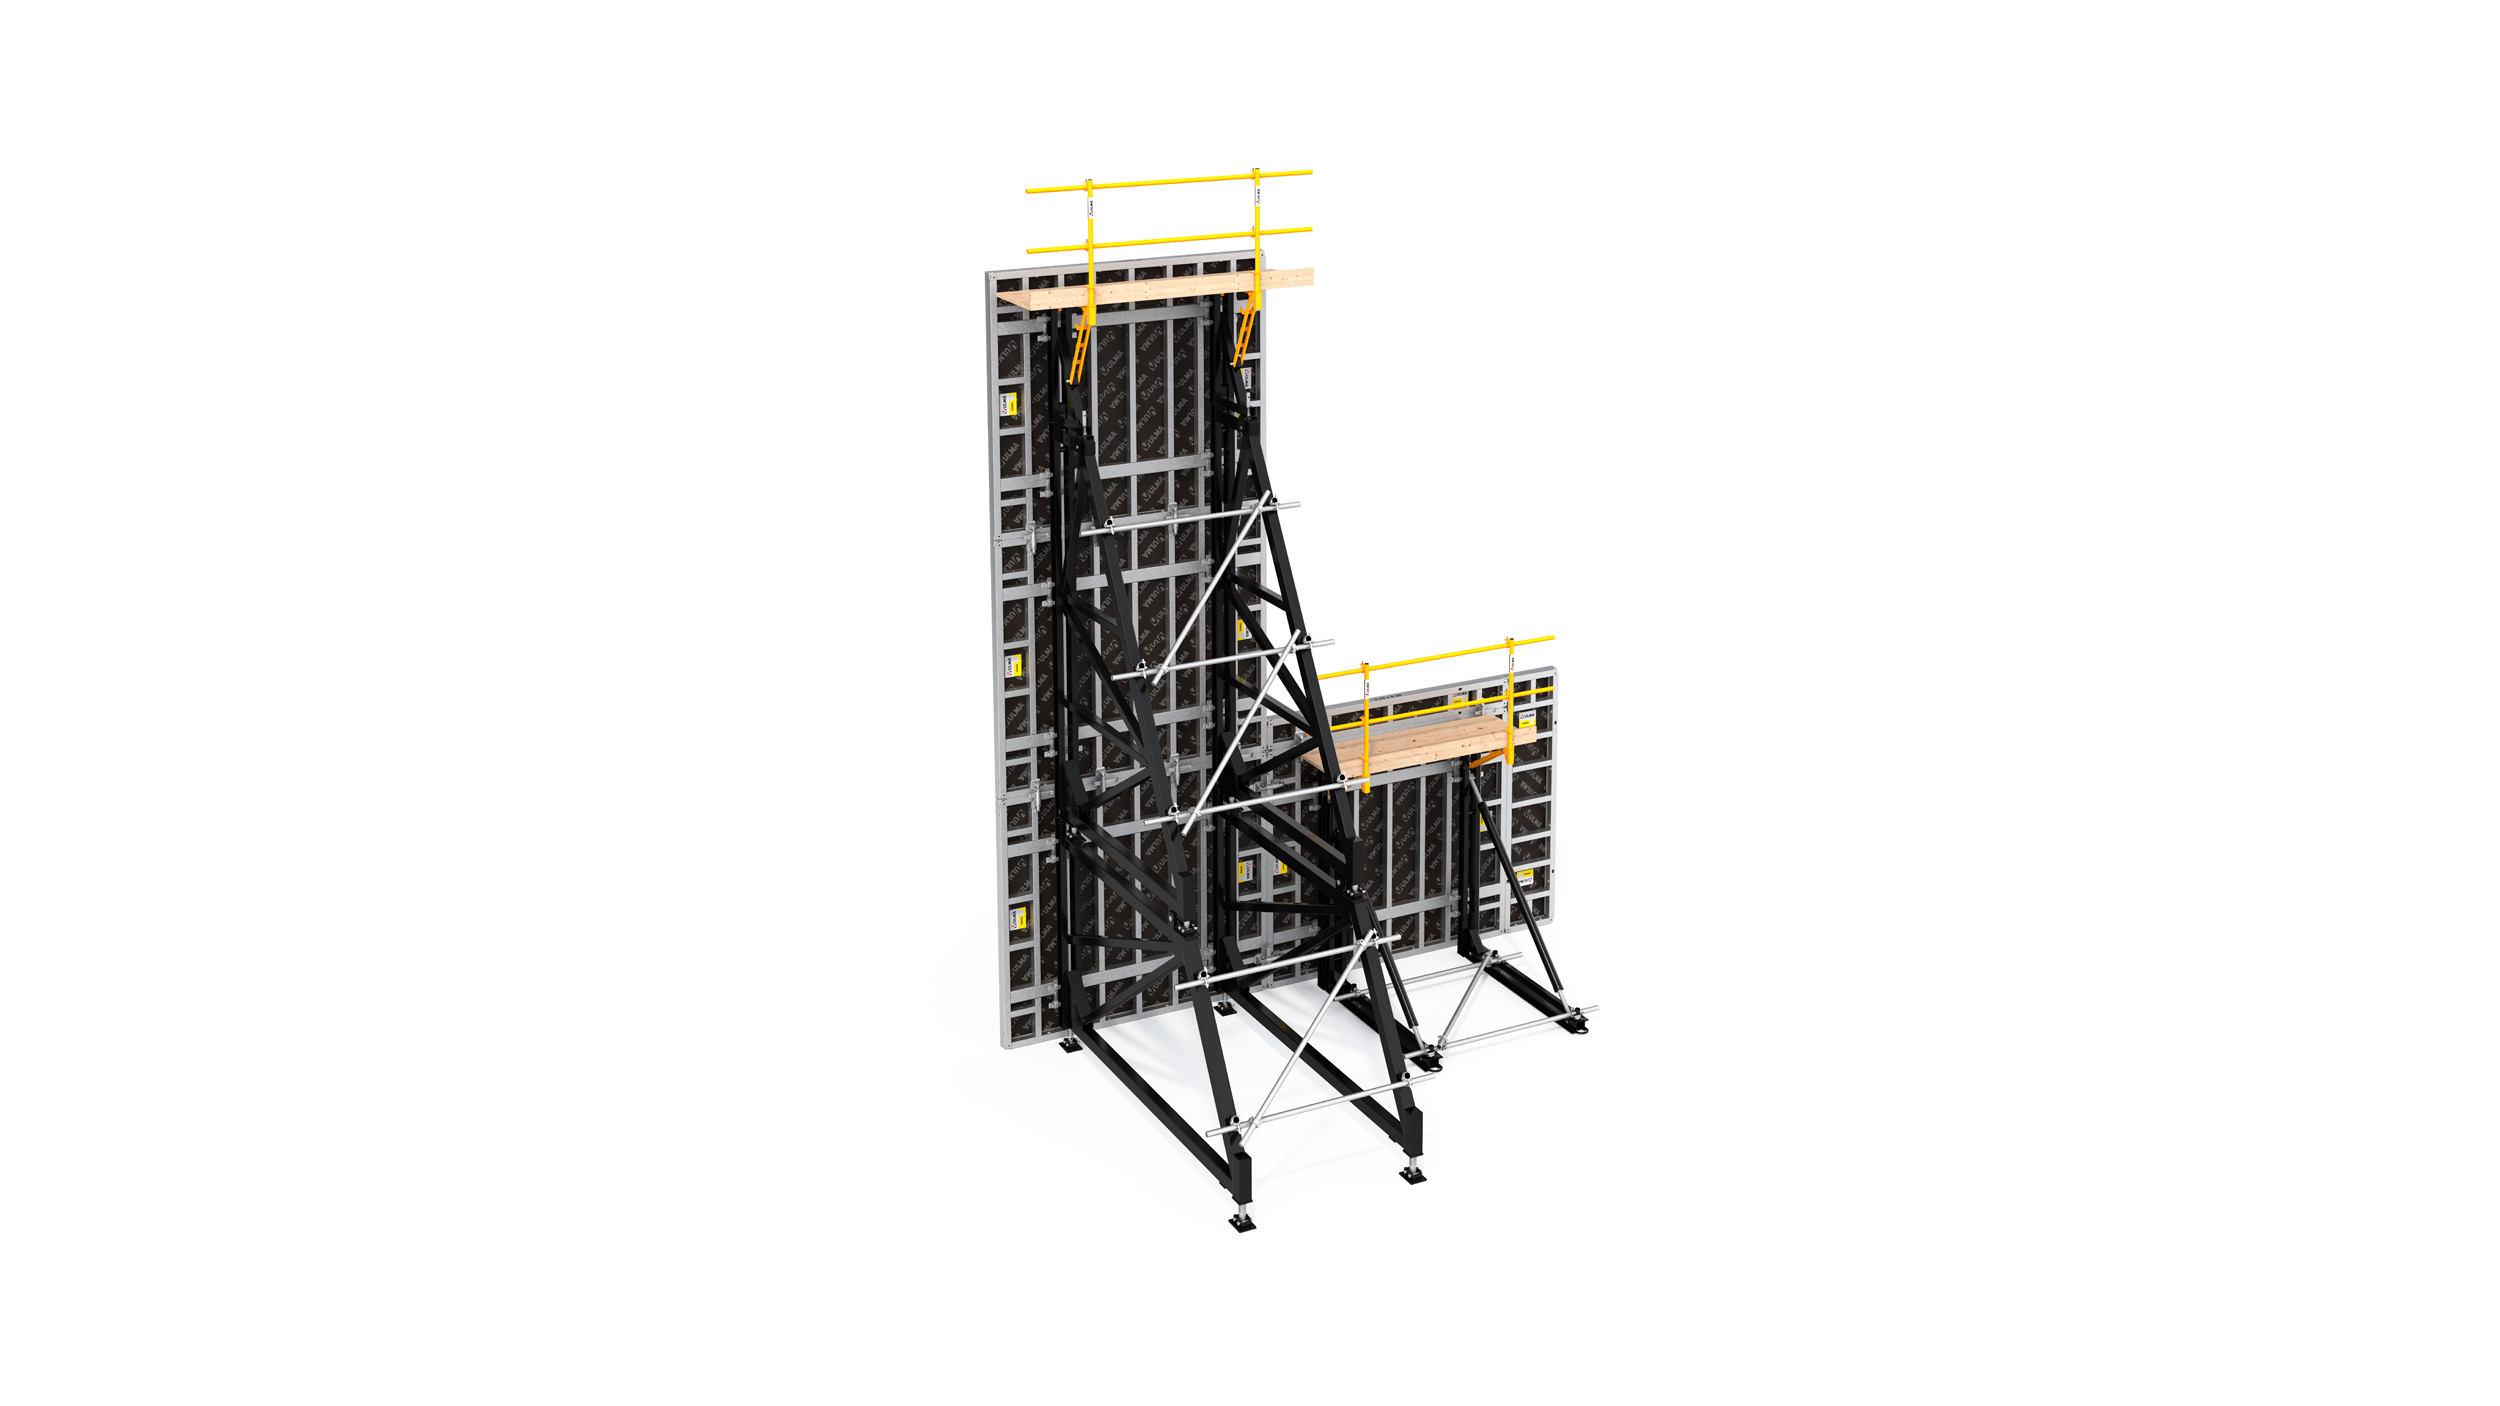 Single-sided forming systems for one-sided wall applications ranging between 8’ to 30’.
Compatible with all ULMA wall formwork panels.